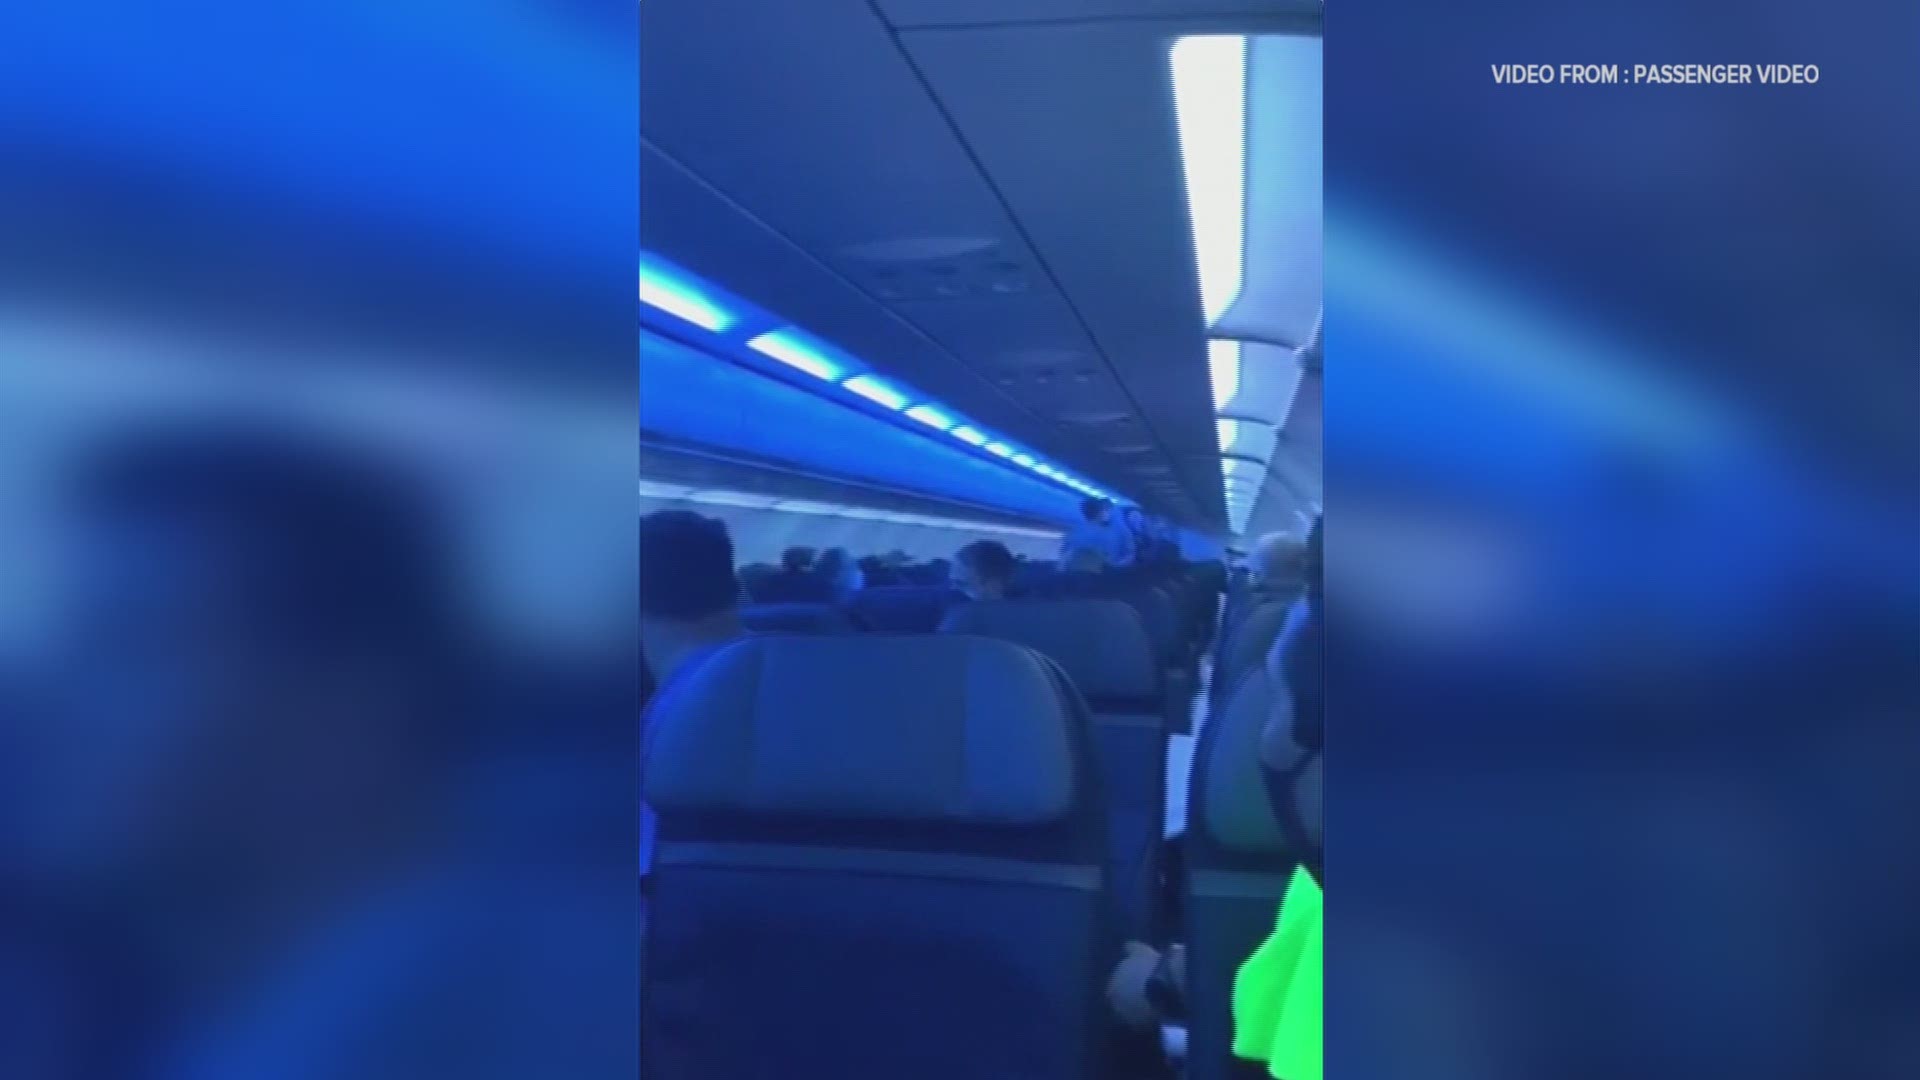 A flight from Sea-Tac Airport to Chicago was forced to return to Sea-Tac after a passenger became aggressive and threatened to kill everyone on board.